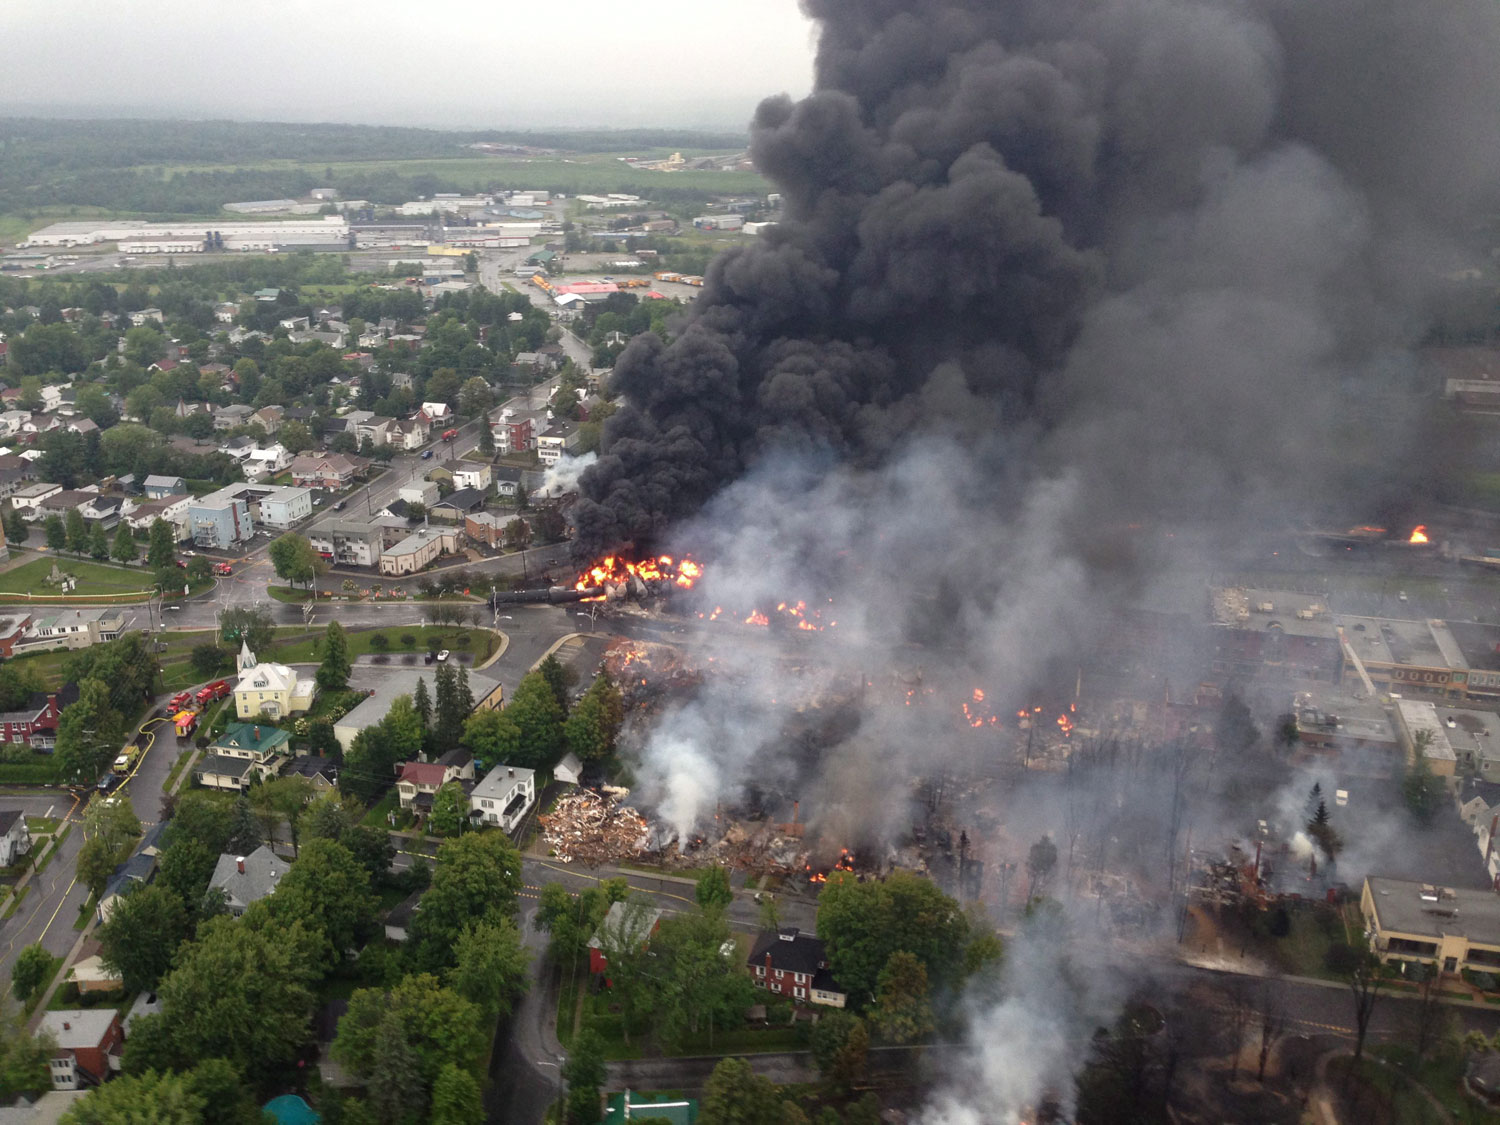 However, it is actually the town of Lac-Megantic, Quebec following a train derailment that sparked several explosions on July 6, 2013.